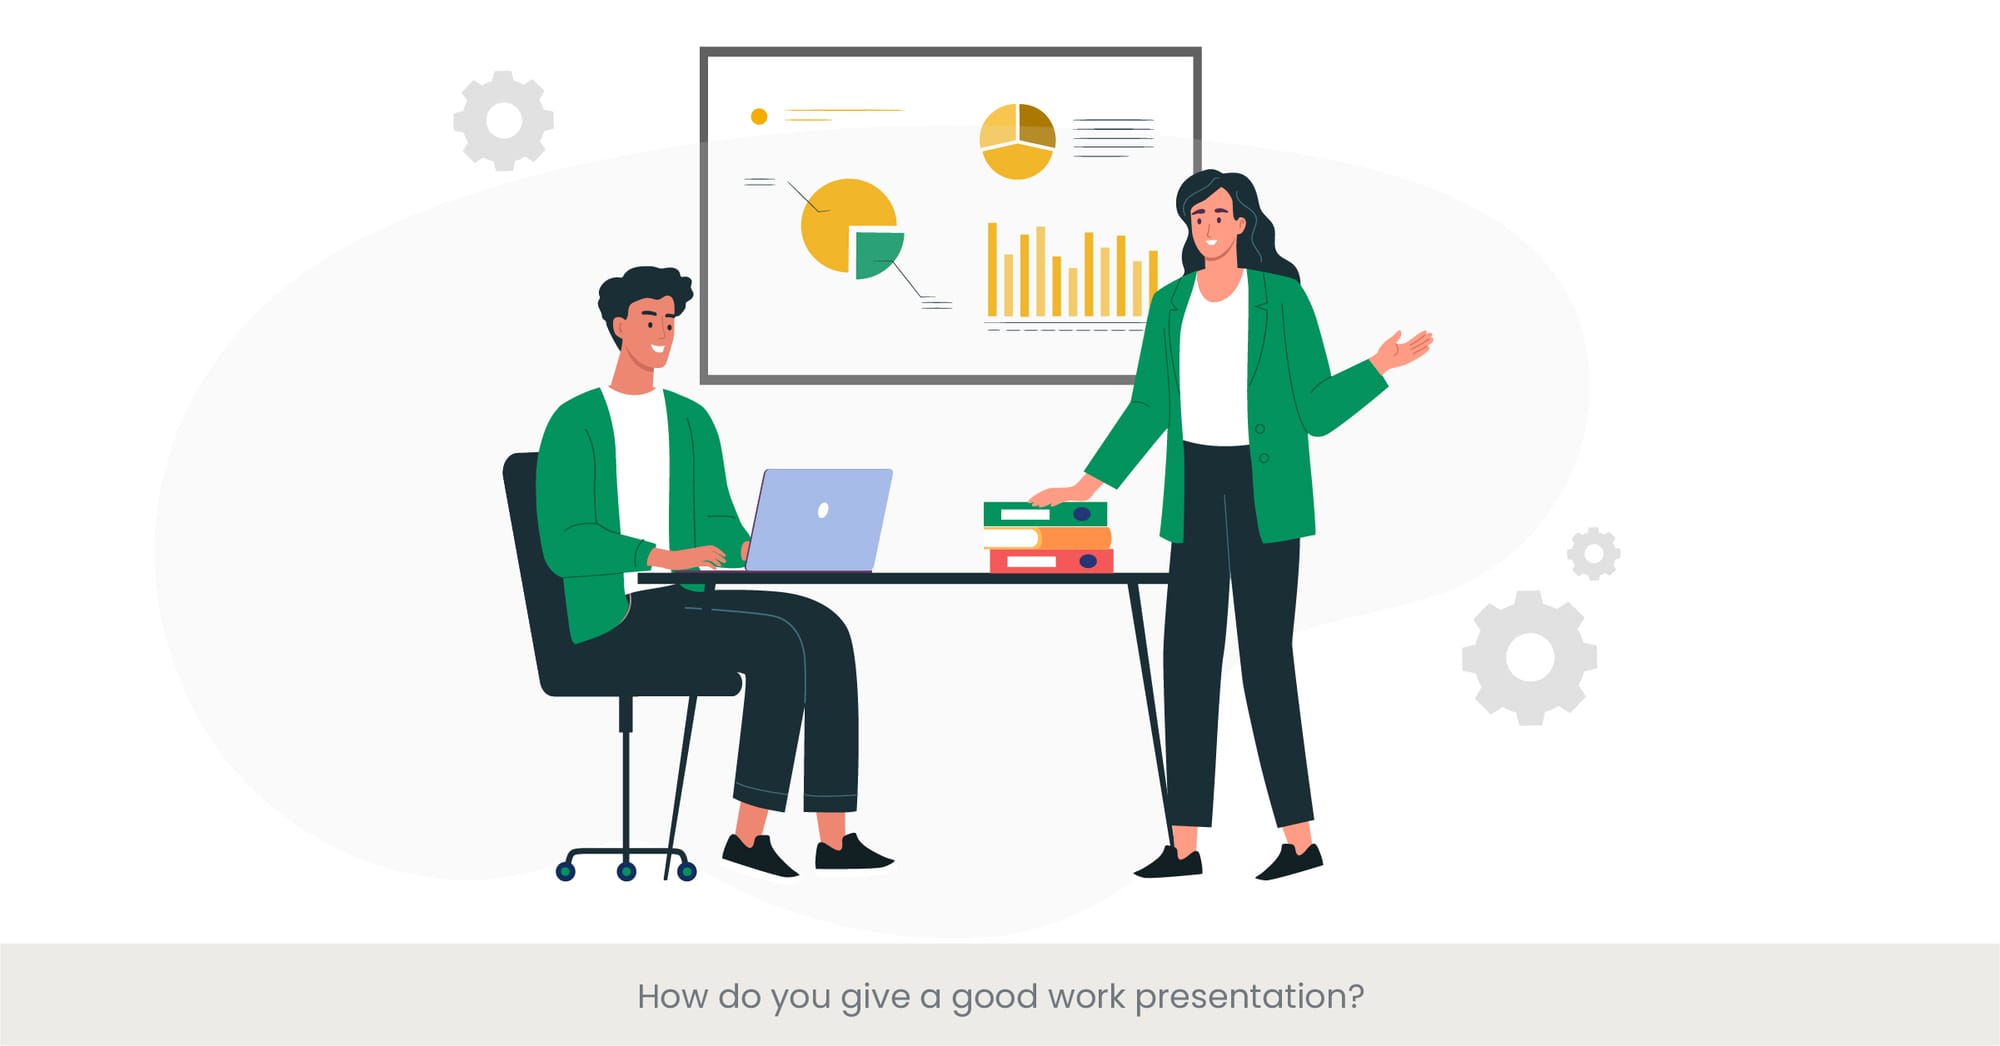 How do you give a good work presentation